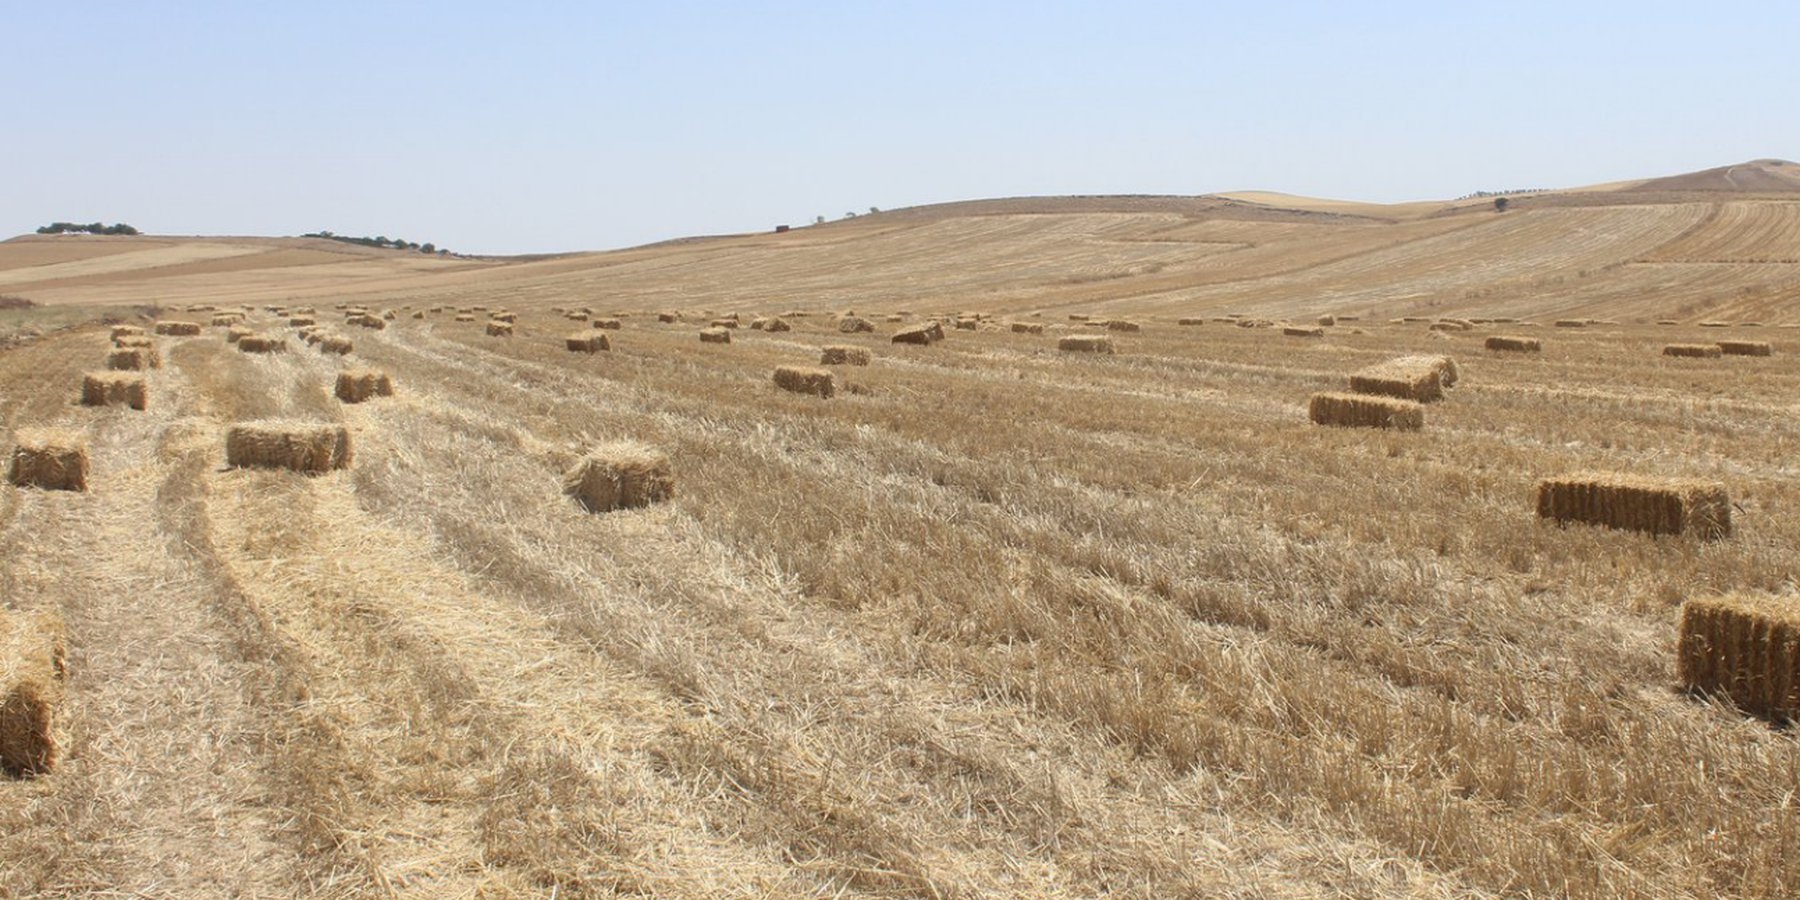 A farm field with a mulch soil cover. The bales of straw are a result of the harvesting by a combine. The stubble is used for limited grazing, Tunisia